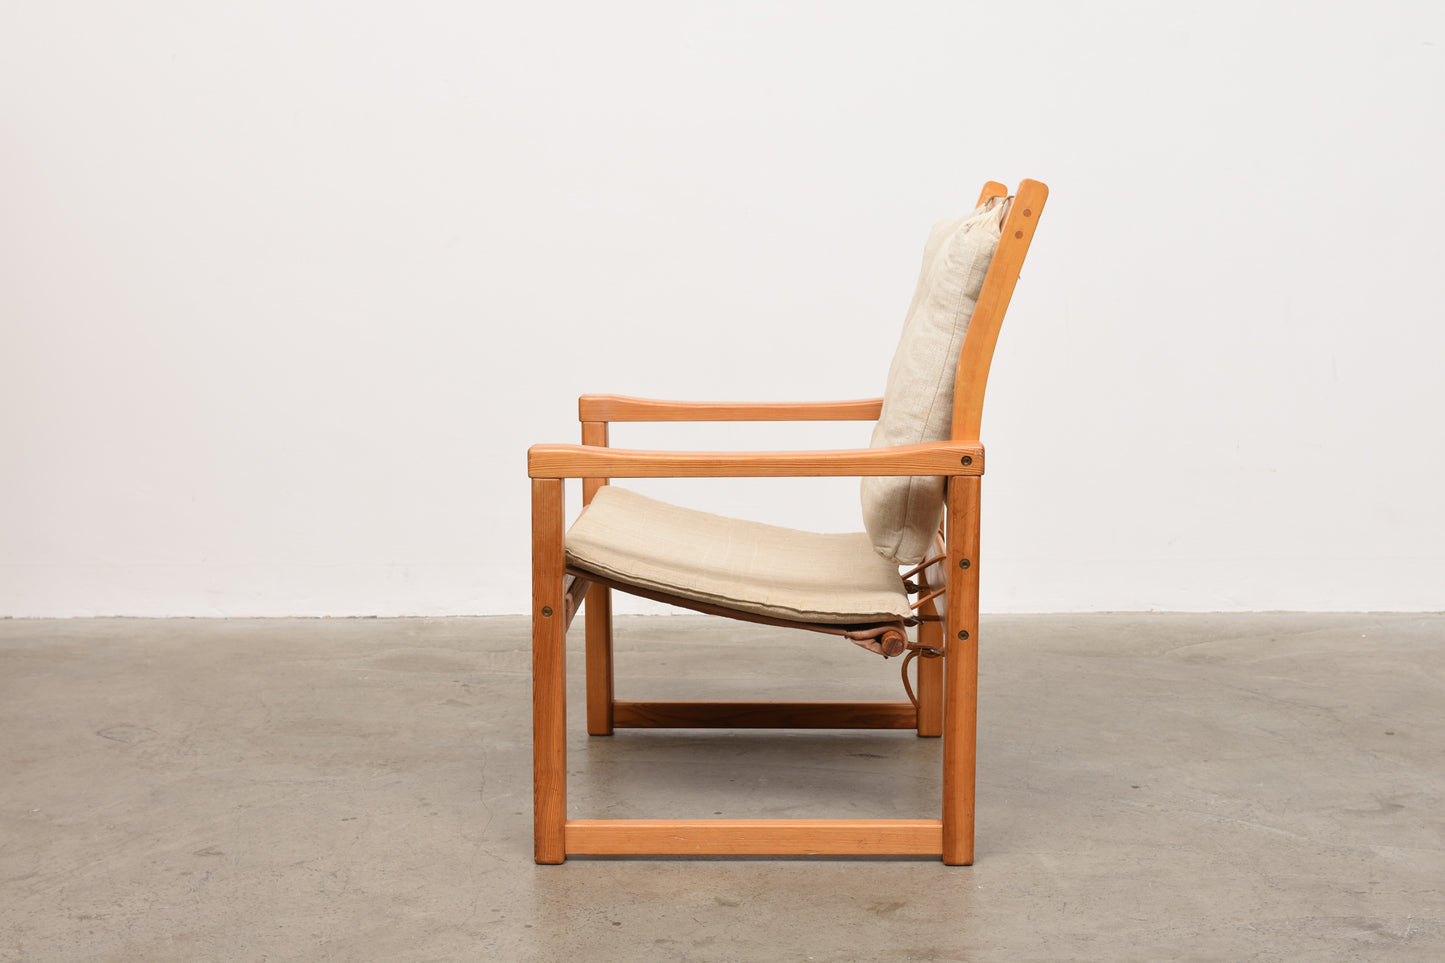 1970s 'Diana' lounger by Karin Möbring